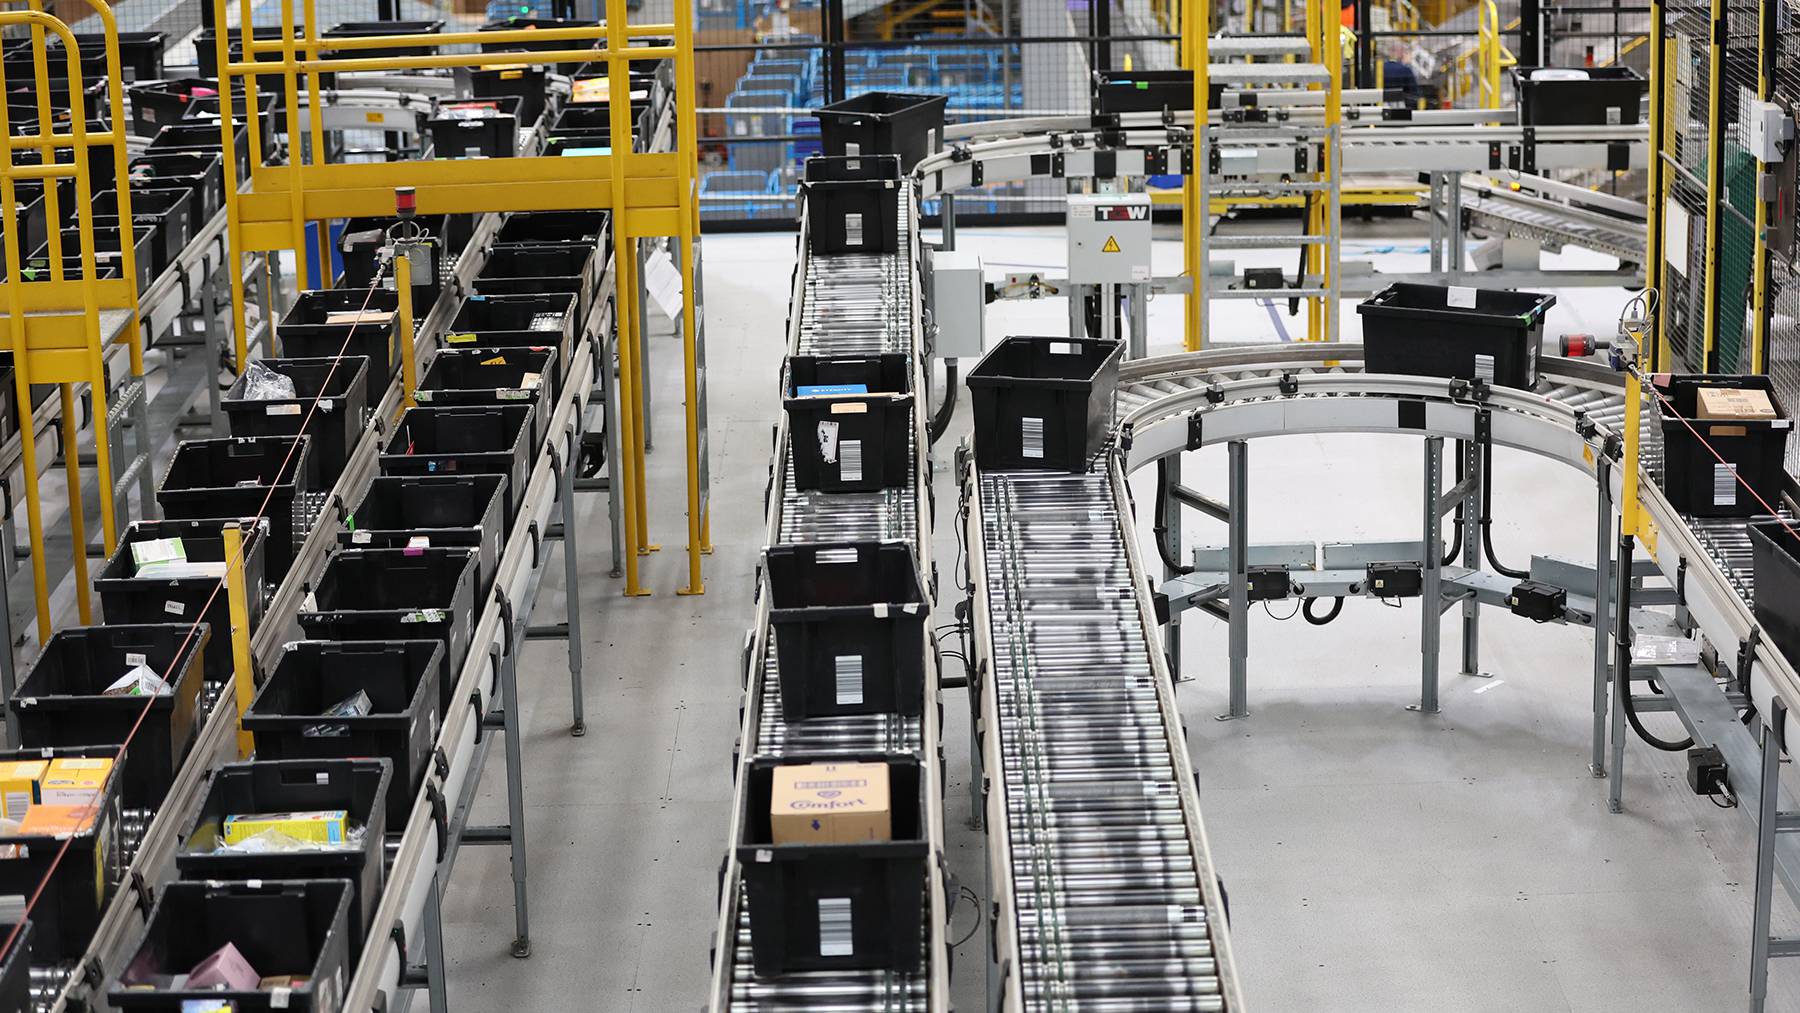 Products move down a conveyor belt in a large fulfillment centre.